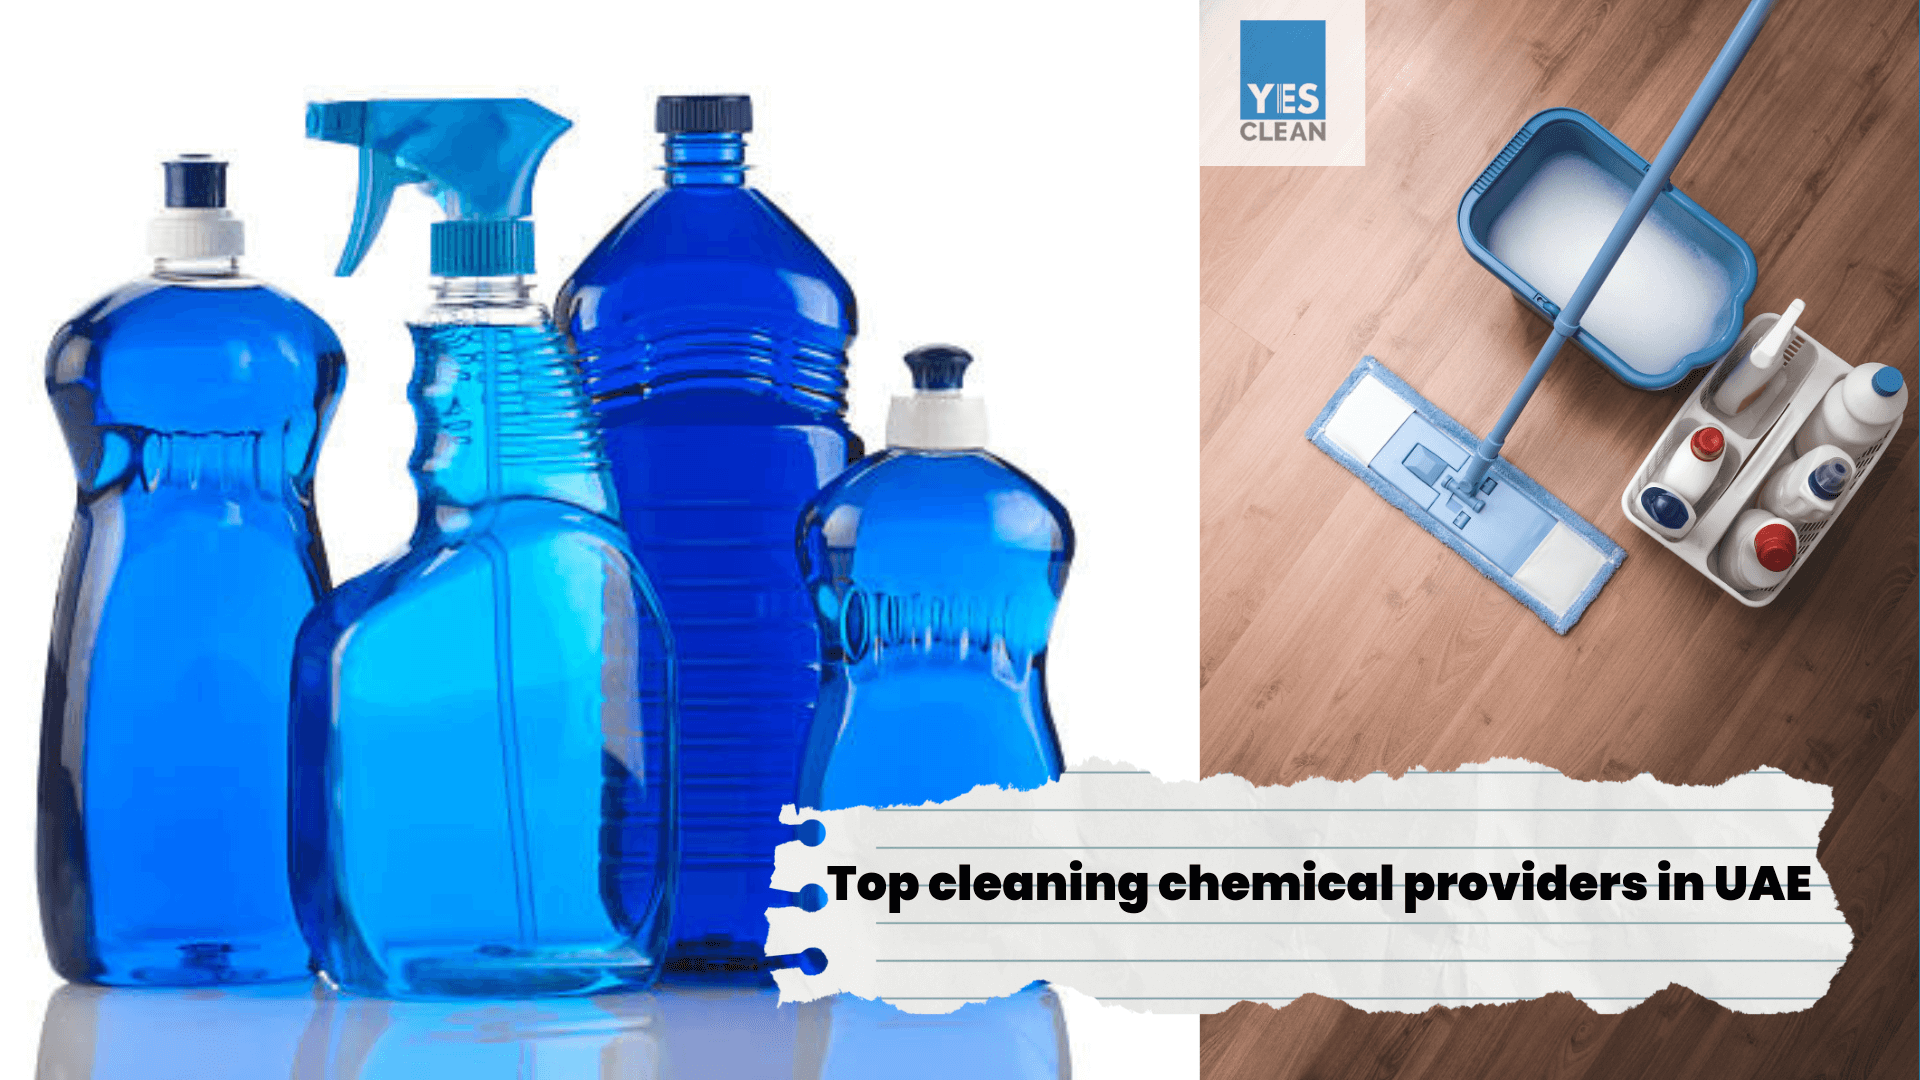 Top cleaning chemical providers in UAE